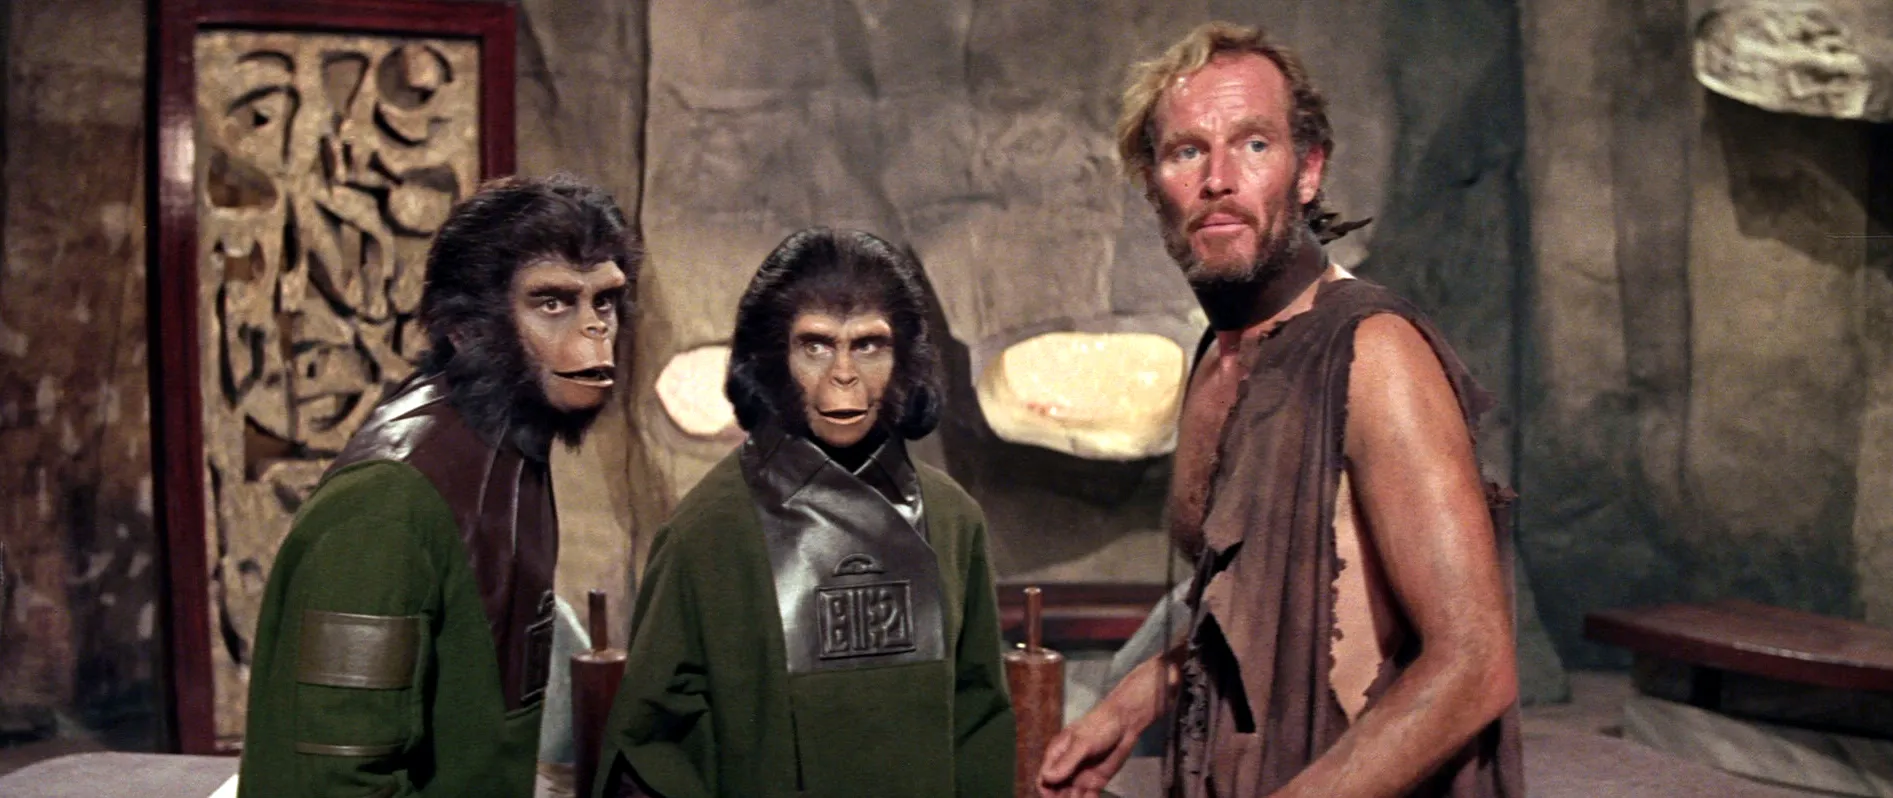 The Original Planet Of The Apes Is Innovative And Refreshing The